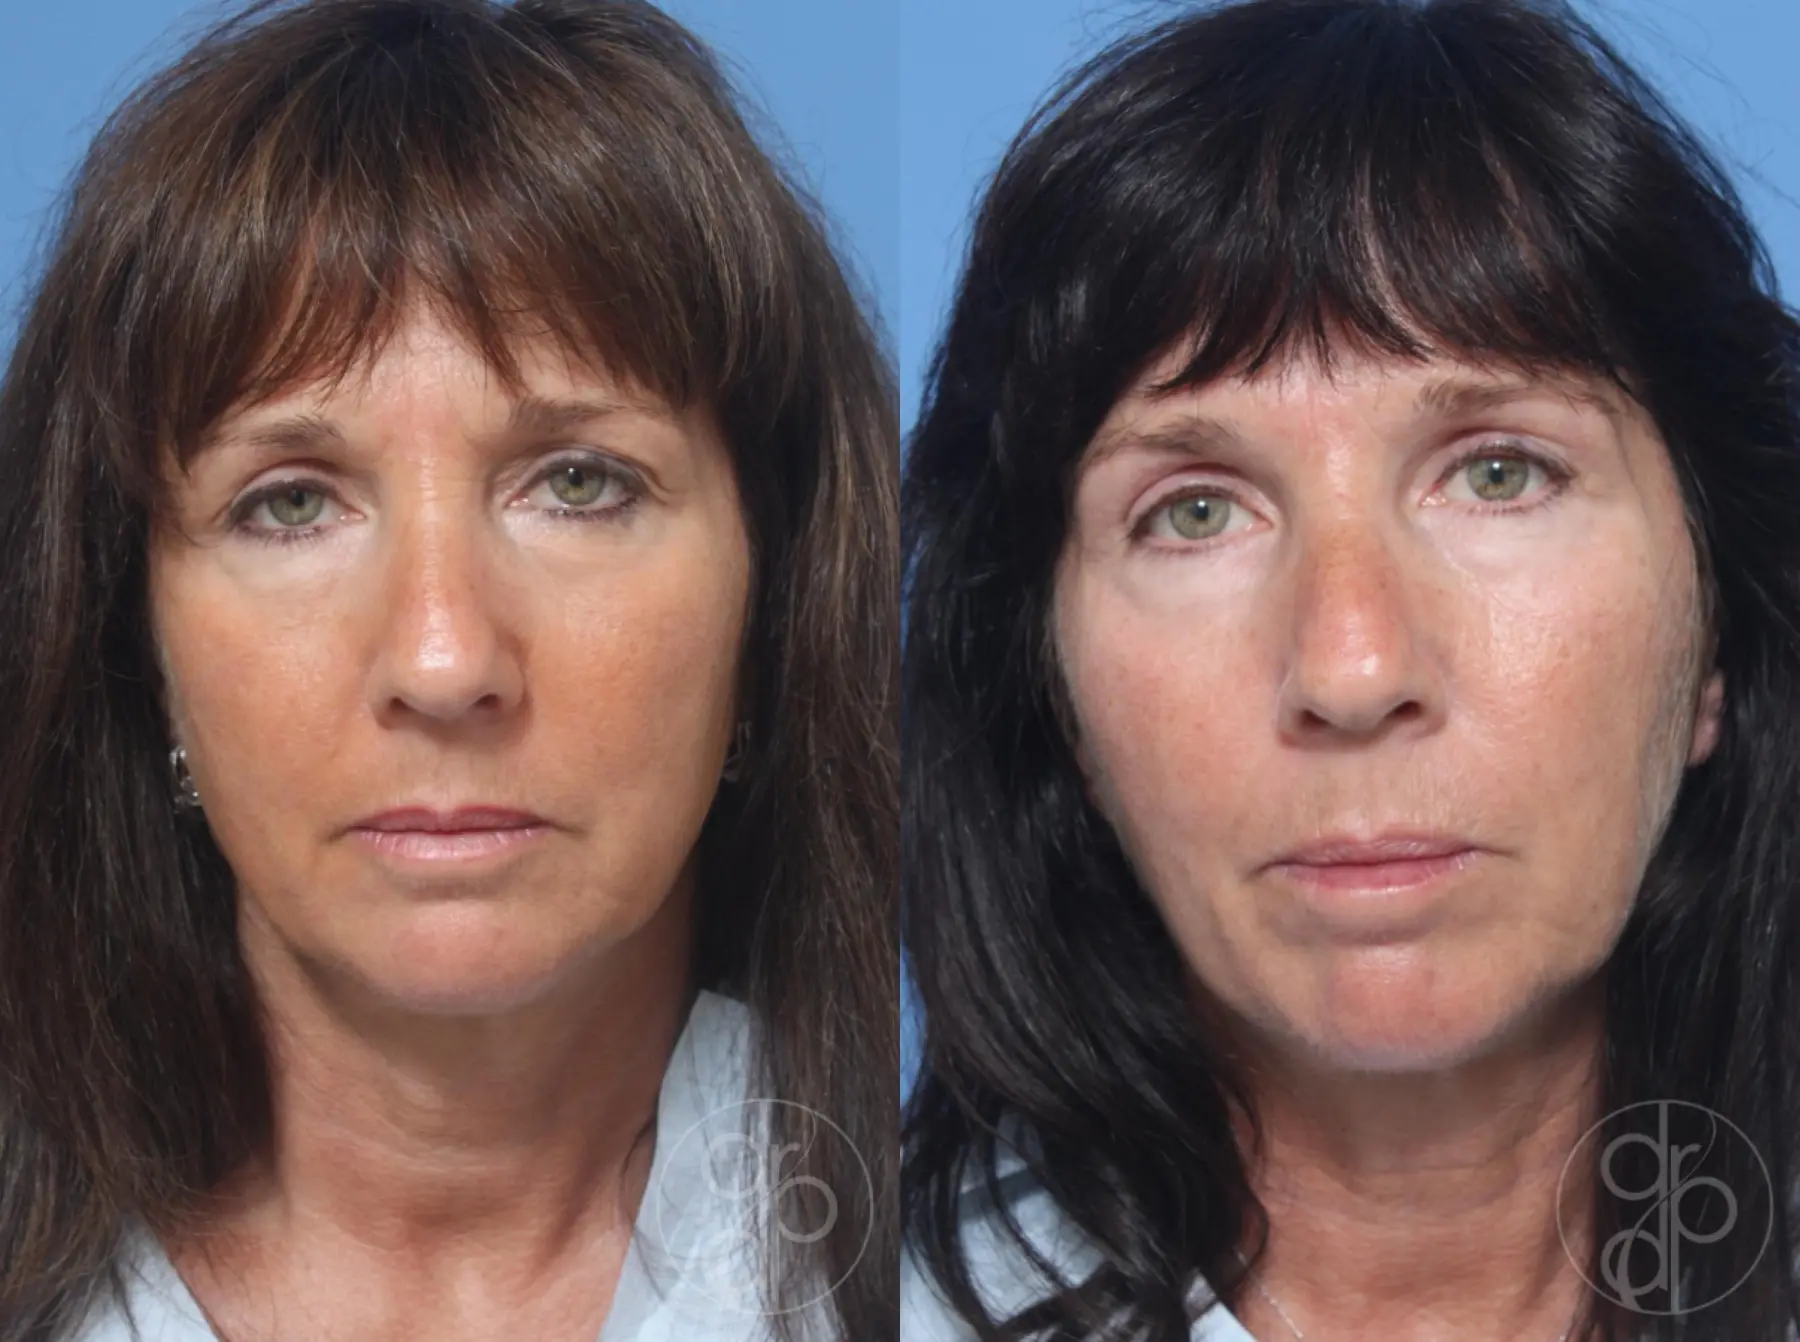 Blepharoplasty: Patient 8 - Before and After  